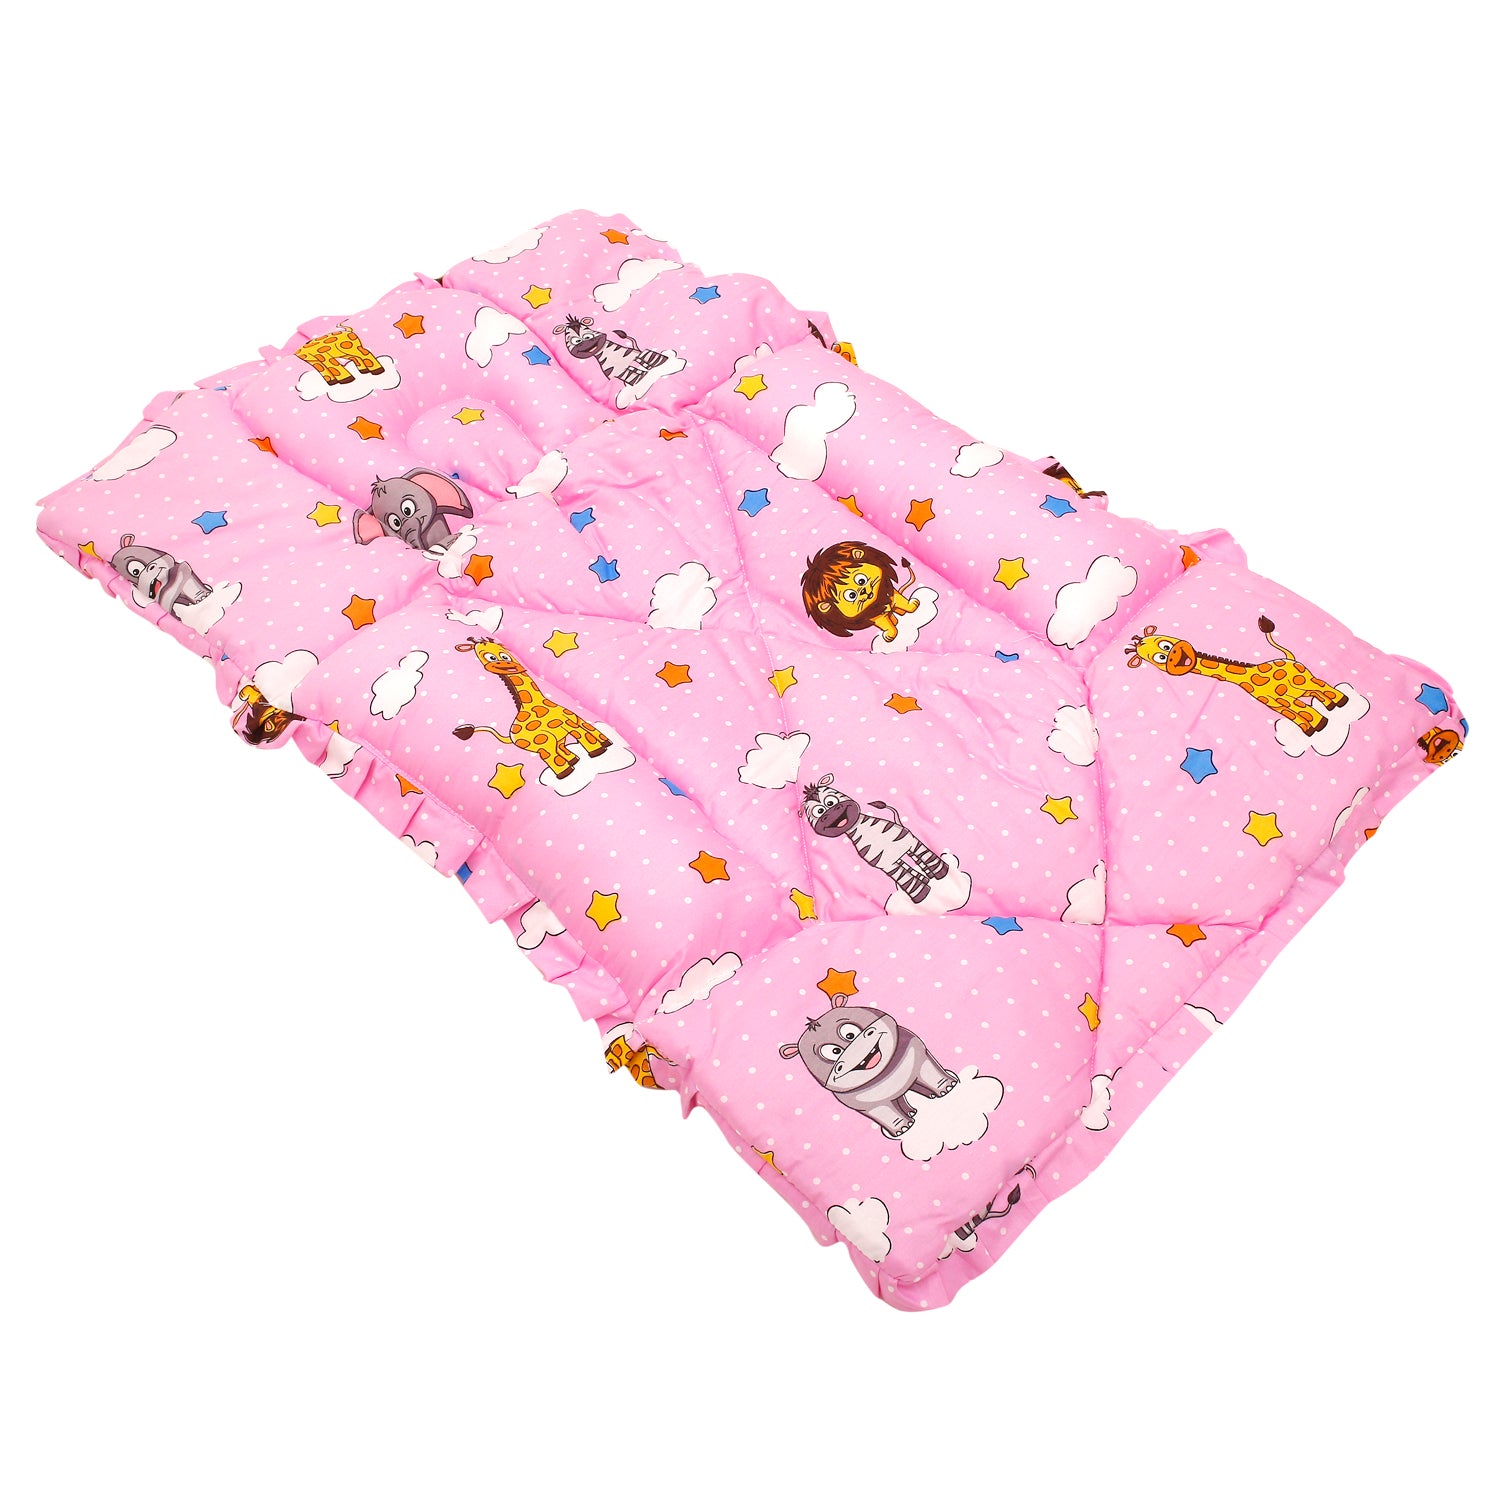 Baby Moo Mattress With Fixed Neck Pillow And Bolsters Flying Animals Pink